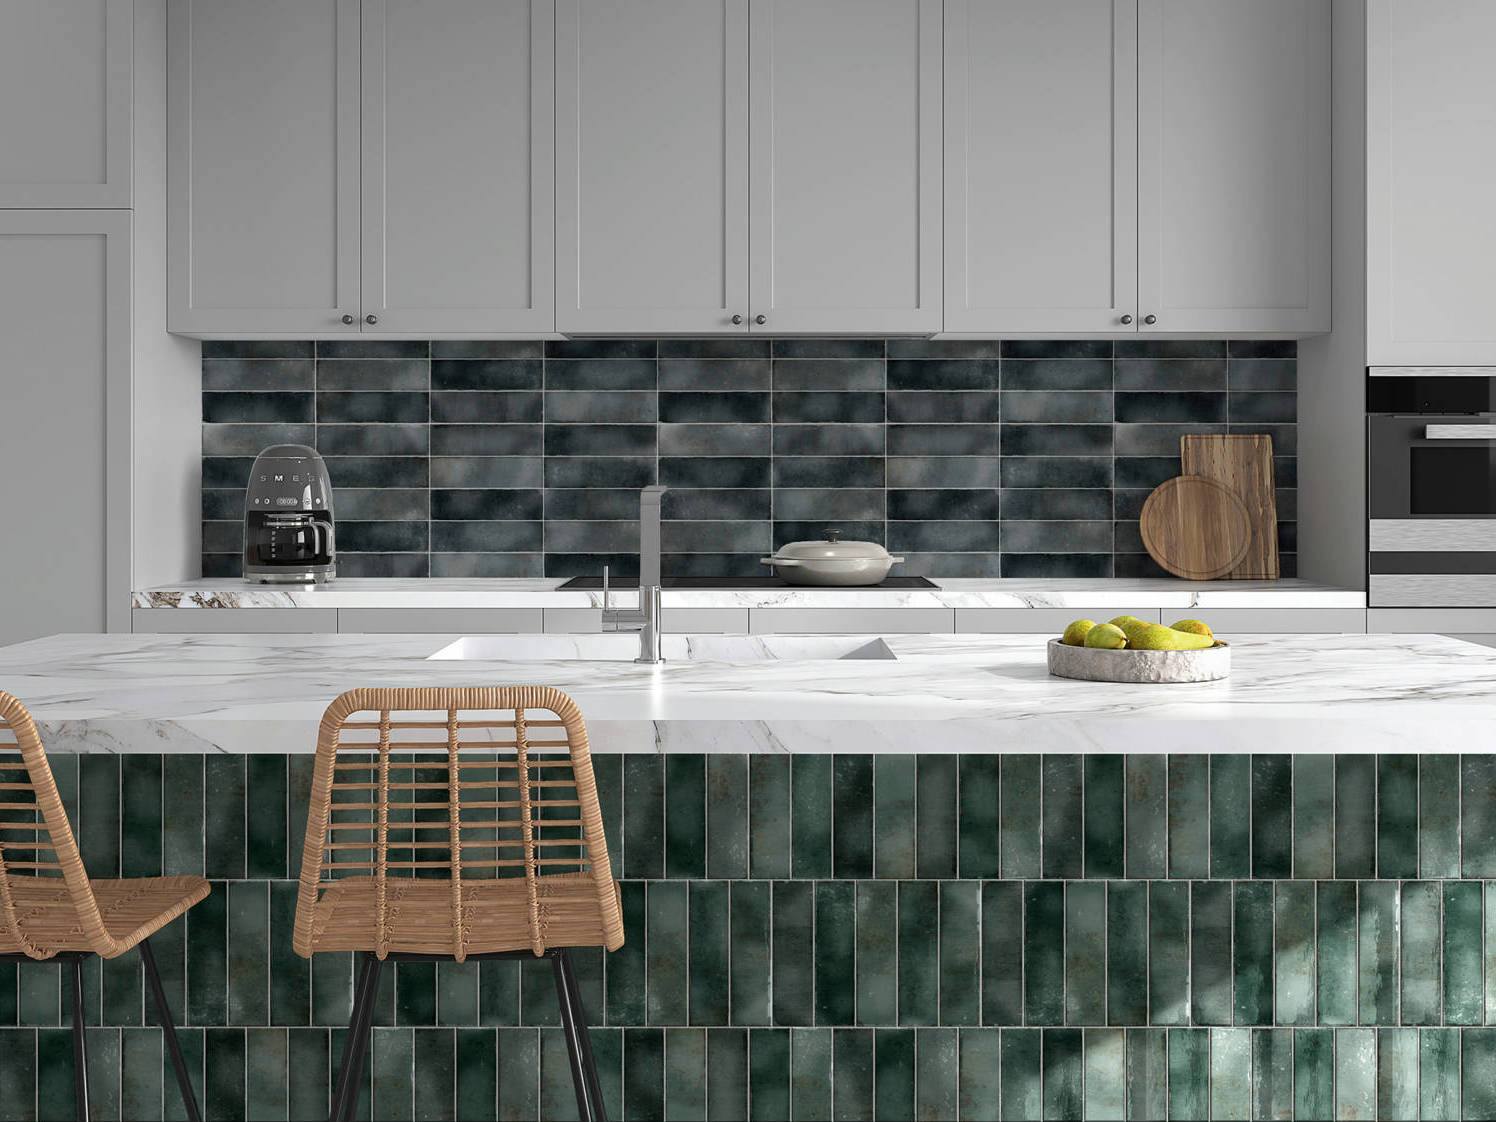 Miami Brickell Jade and Key Biscayne Anthracite | Arley Wholesale